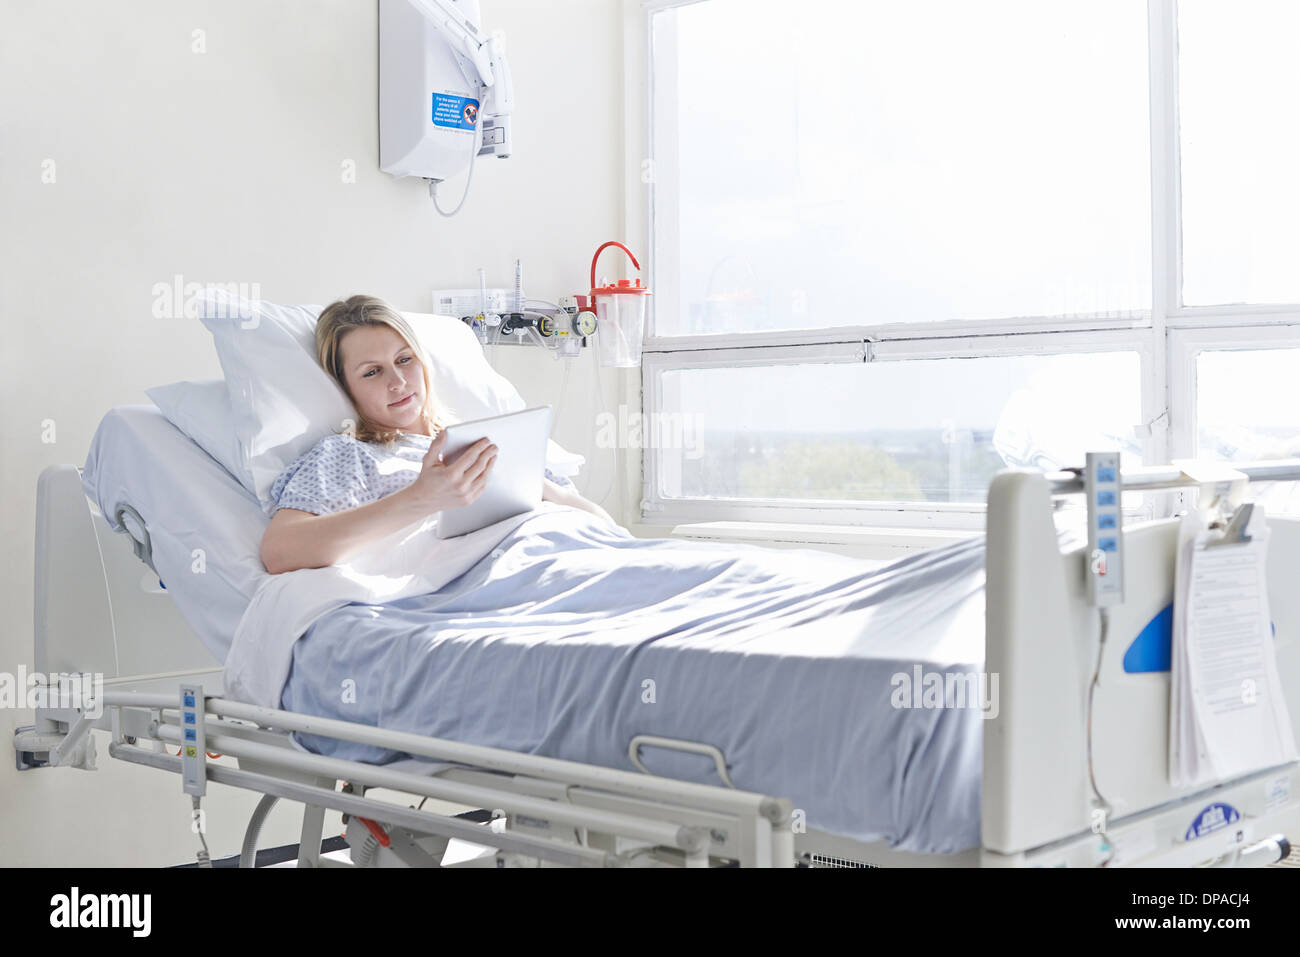 Patient lying on hospital bed using digital tablet Banque D'Images